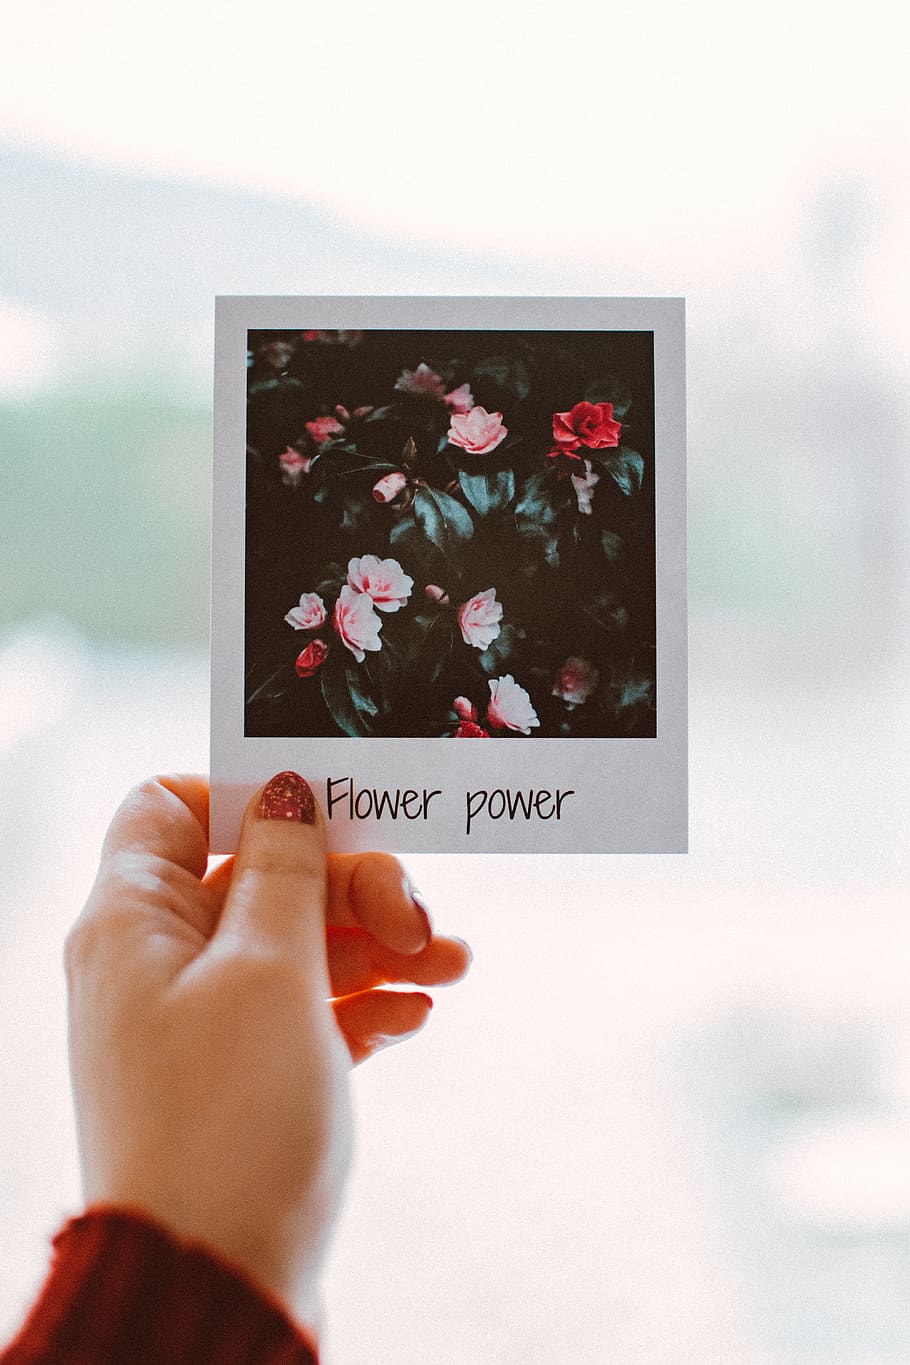 A hand holding a polaroid picture of flowers with the words flower power written underneath - Polaroid